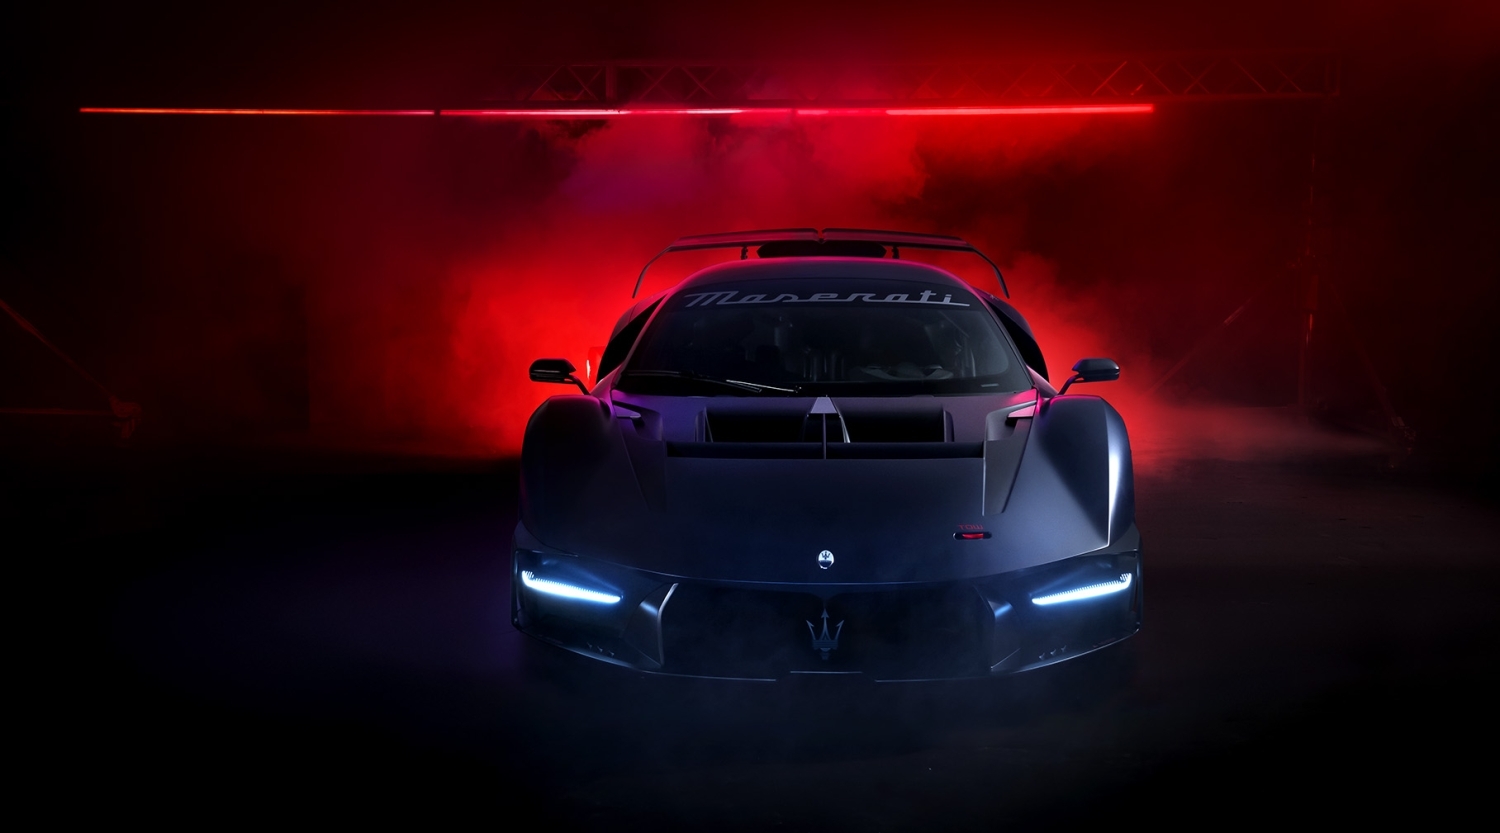 official: maserati mcxtrema unveiled with 730bhp!